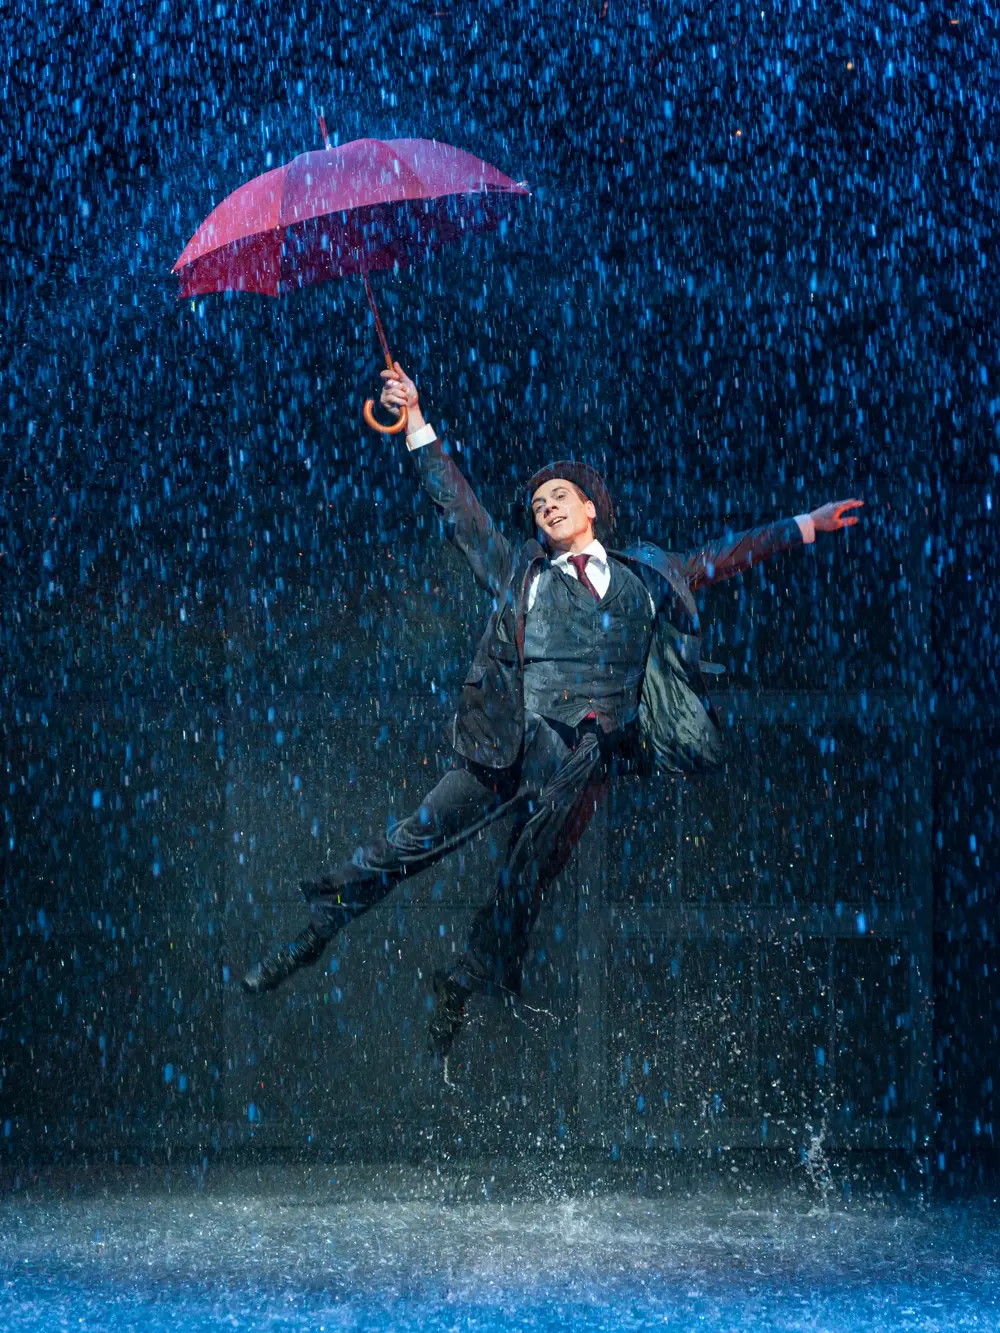 A performer on stage, jumping in the air while water is falling down around them and they are holding an open umbrella and pointing it towards the ceiling.